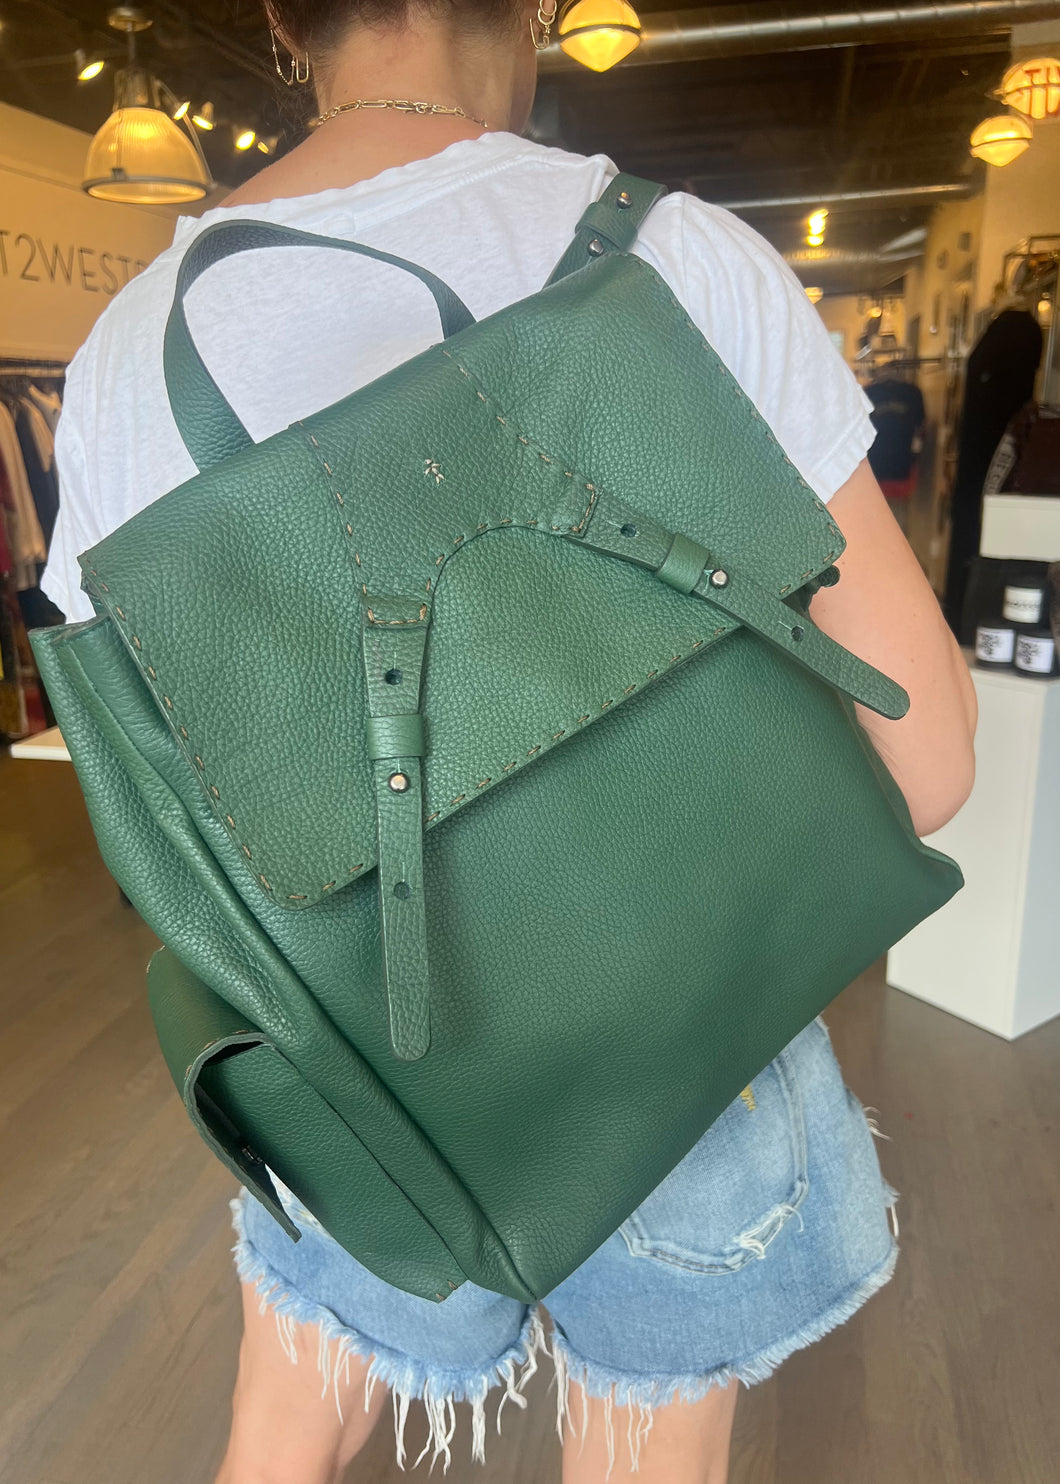 rich green calfskin leather backpack at WEST in westport ct and on line at west2westport.com